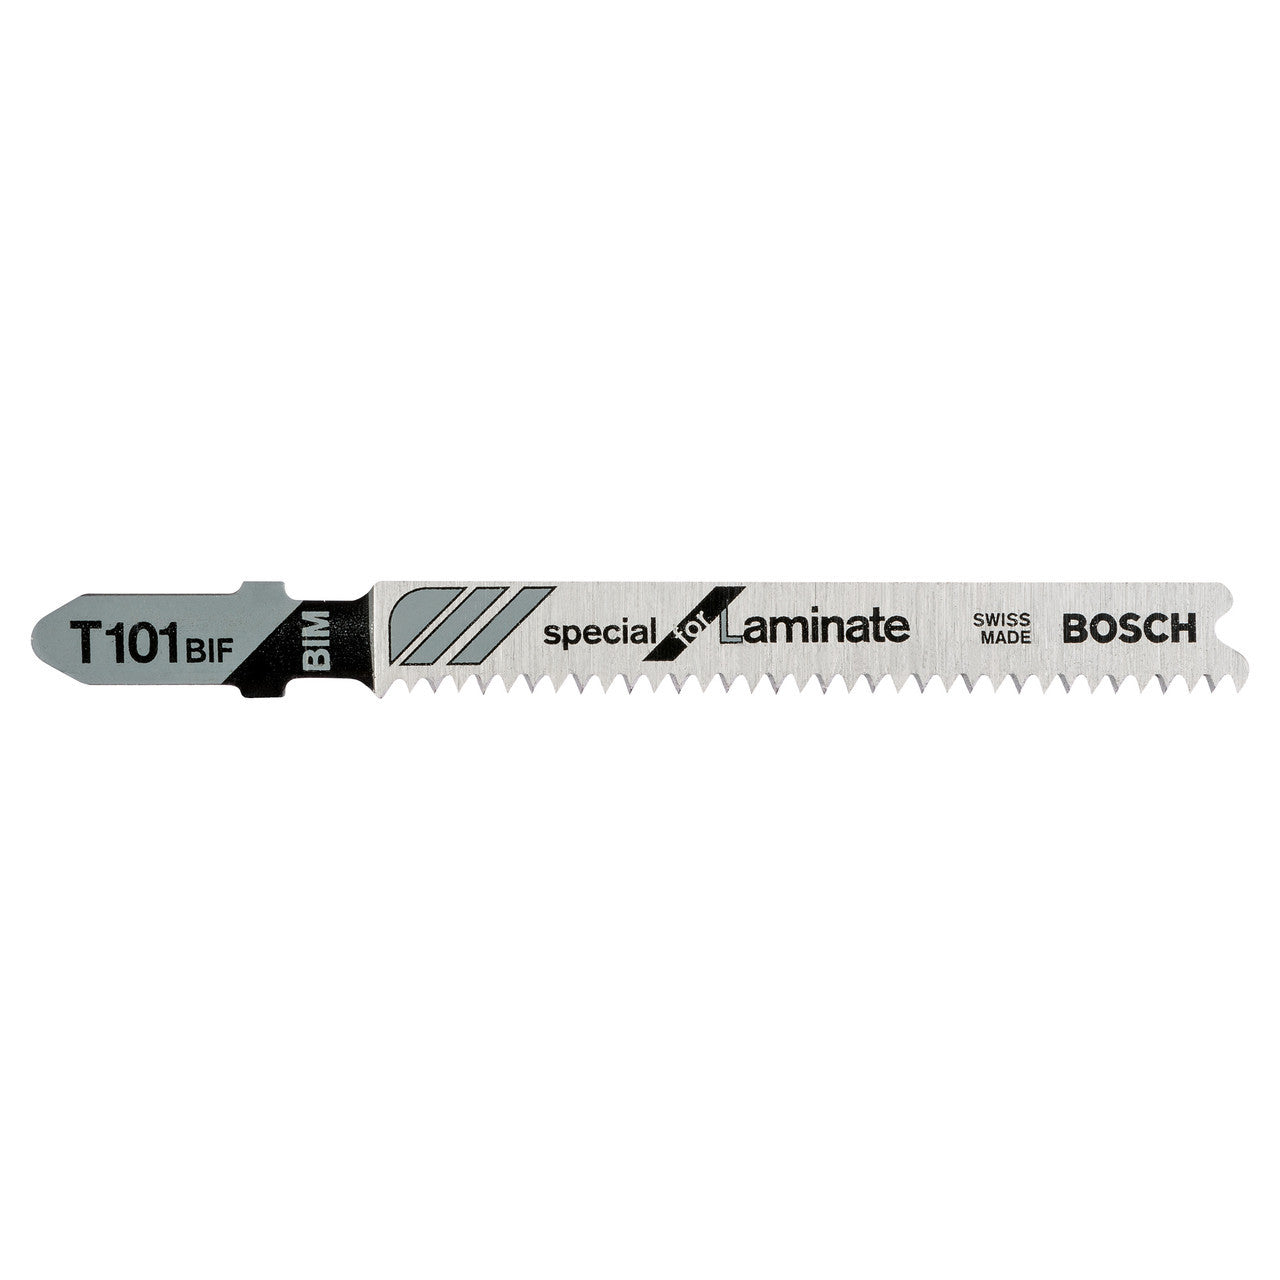 Bosch Jigsaw Blades T 101 BIF Special for Laminate 5 Pack 2608636431 Power Tool Services